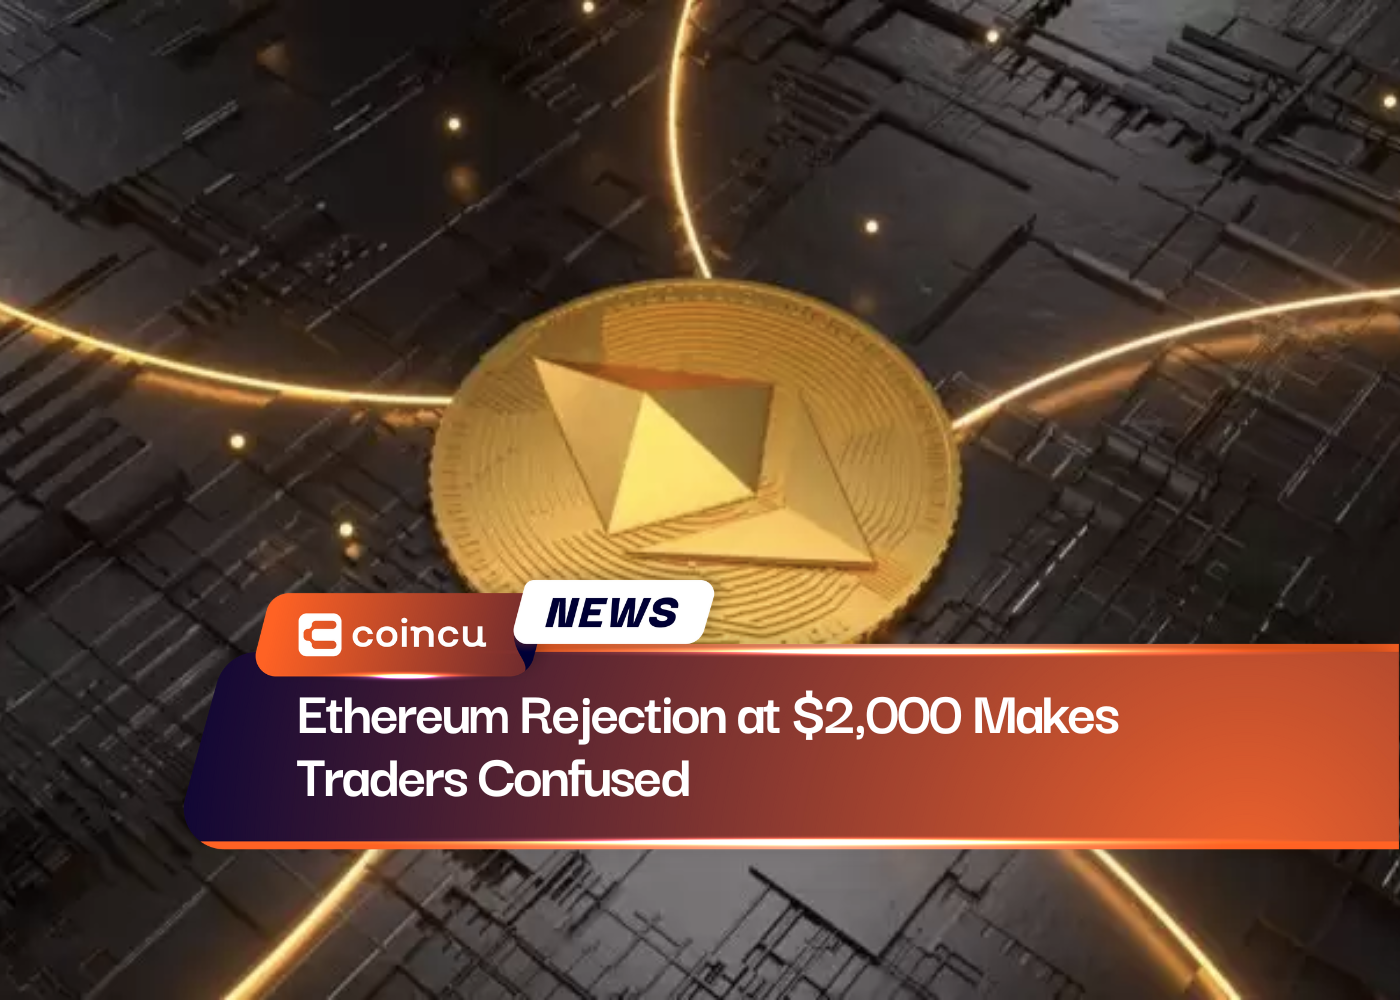 Ethereum Rejection at $2,000 Makes Traders Confused